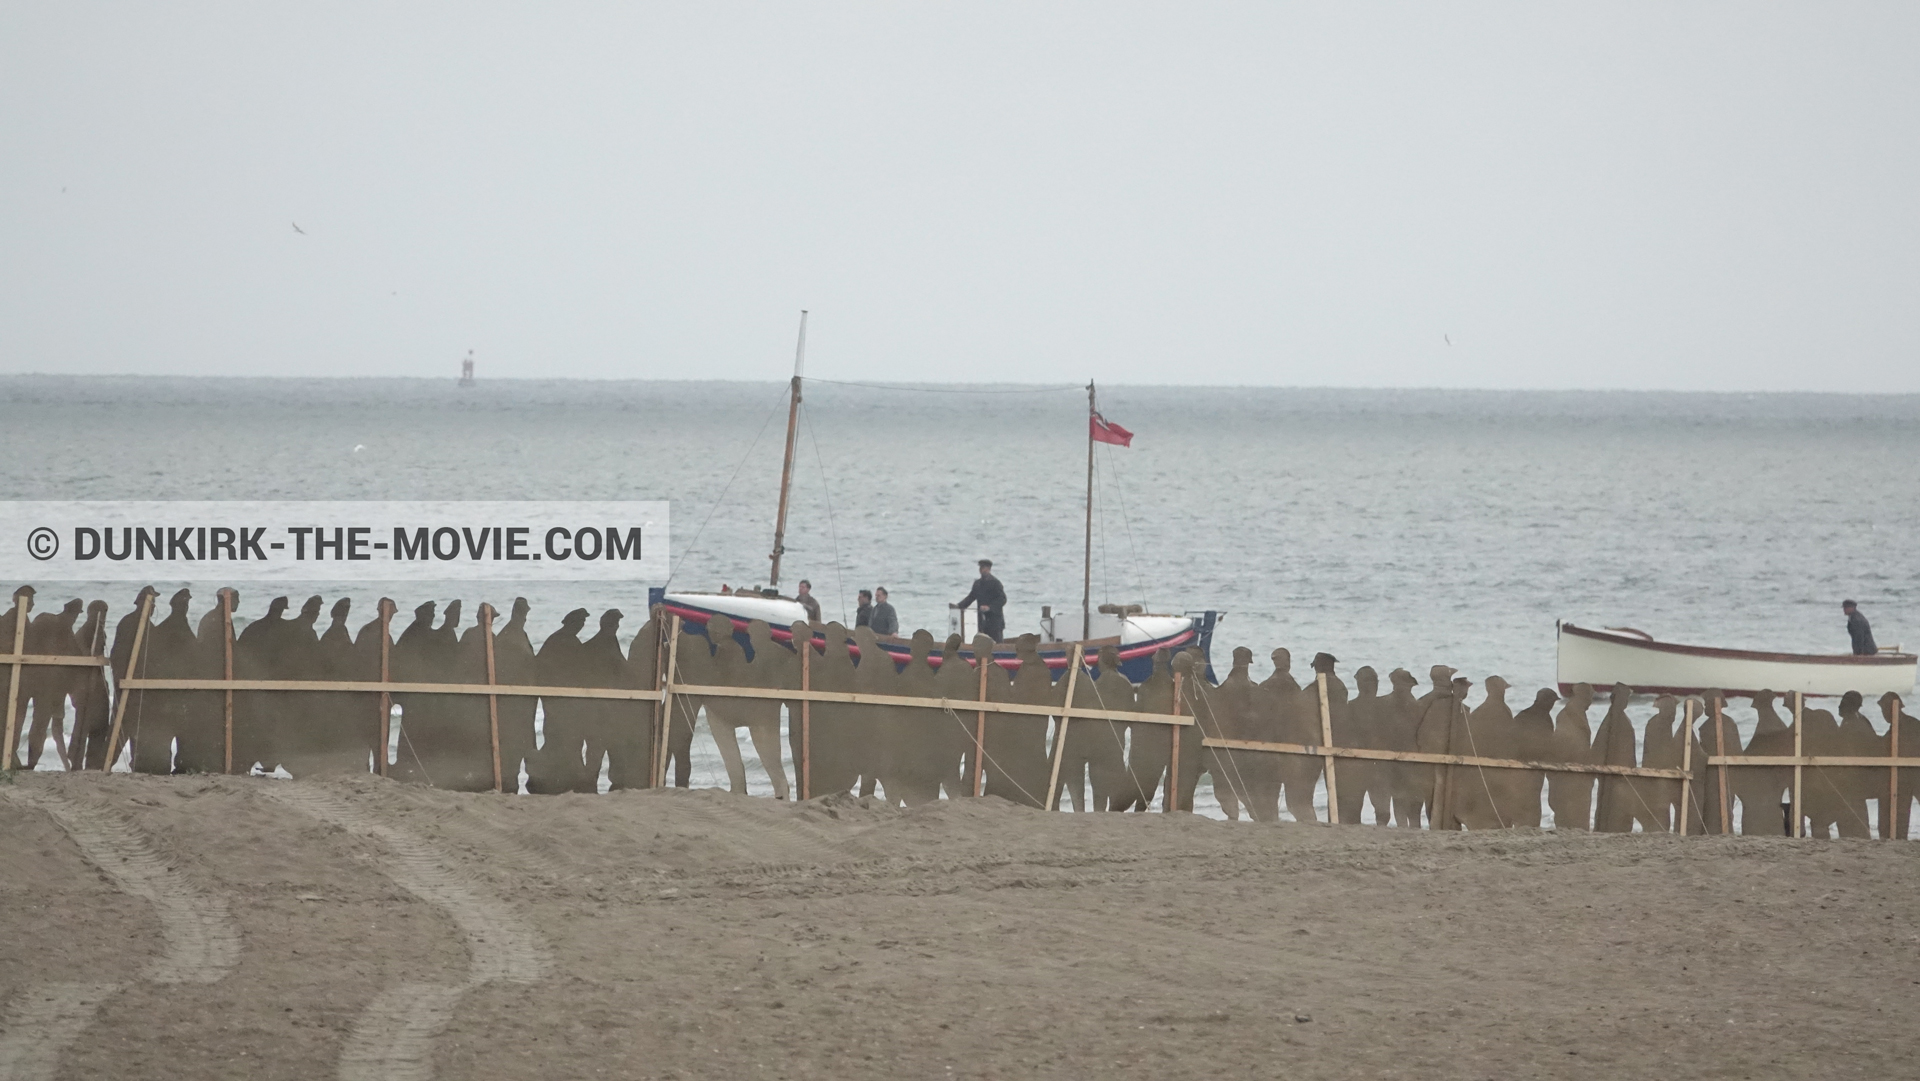 Picture with boat, decor, beach, Henry Finlay lifeboat,  from behind the scene of the Dunkirk movie by Nolan